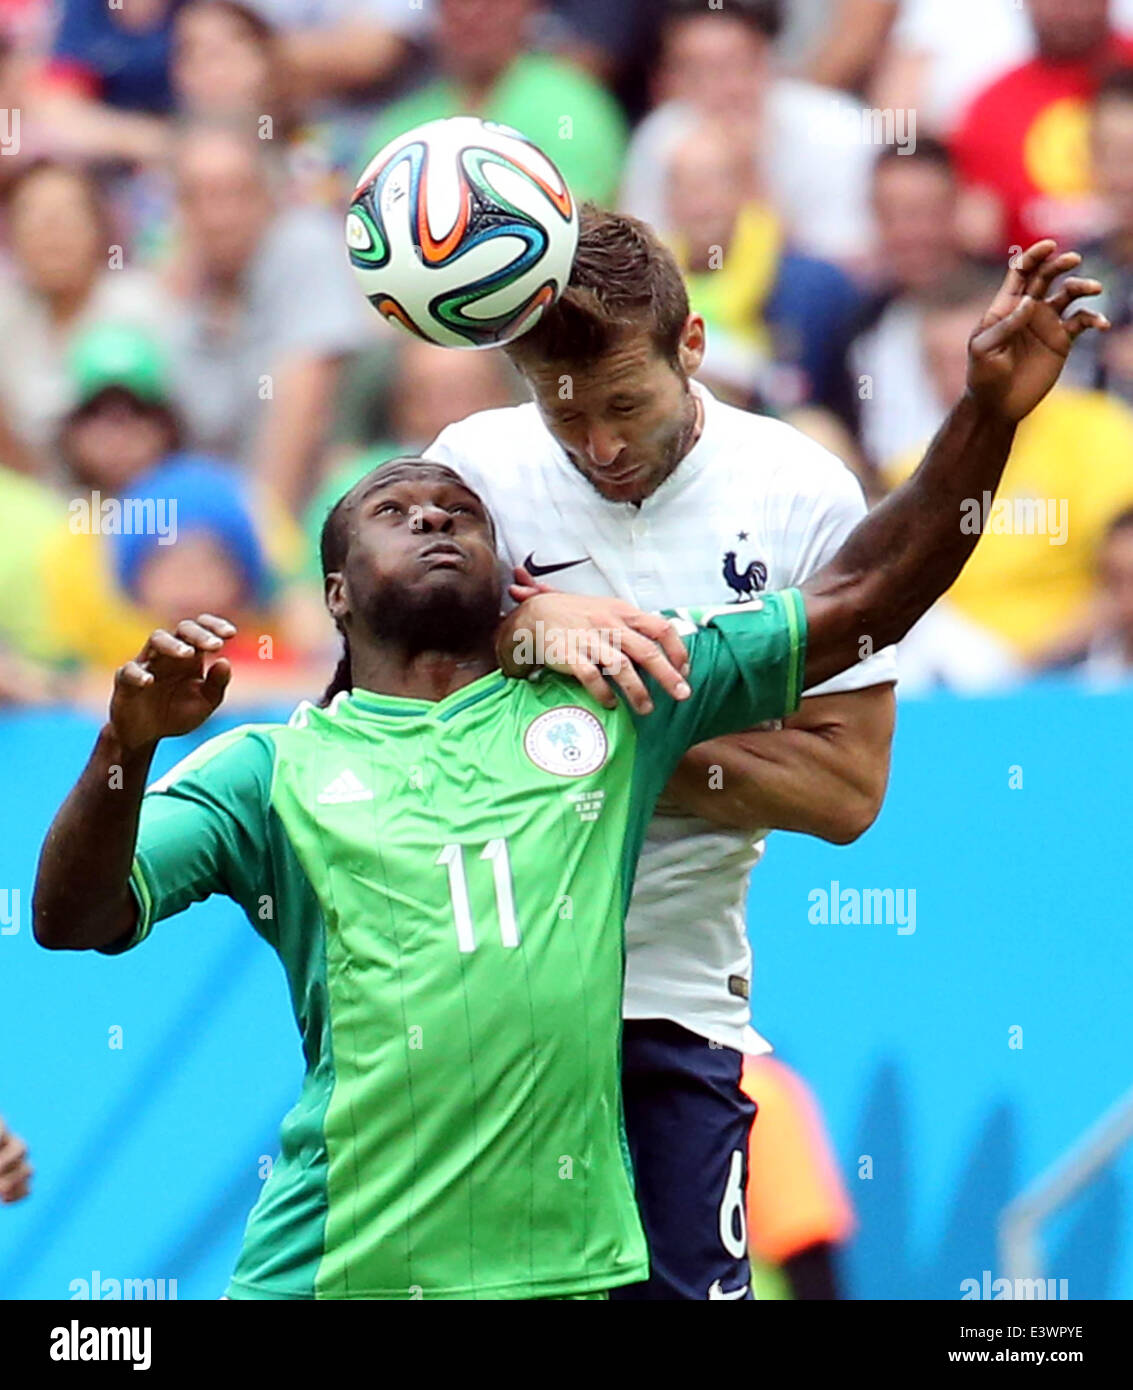 Brasilia, Brazil. 30th June, 2014. France's Yohan Cabaye vies with Nigeria's Victor Moses during a Round of 16 match between France and Nigeria of 2014 FIFA World Cup at the Estadio Nacional Stadium in Brasilia, Brazil, on June 30, 2014. Credit:  Xinhua/Alamy Live News Stock Photo